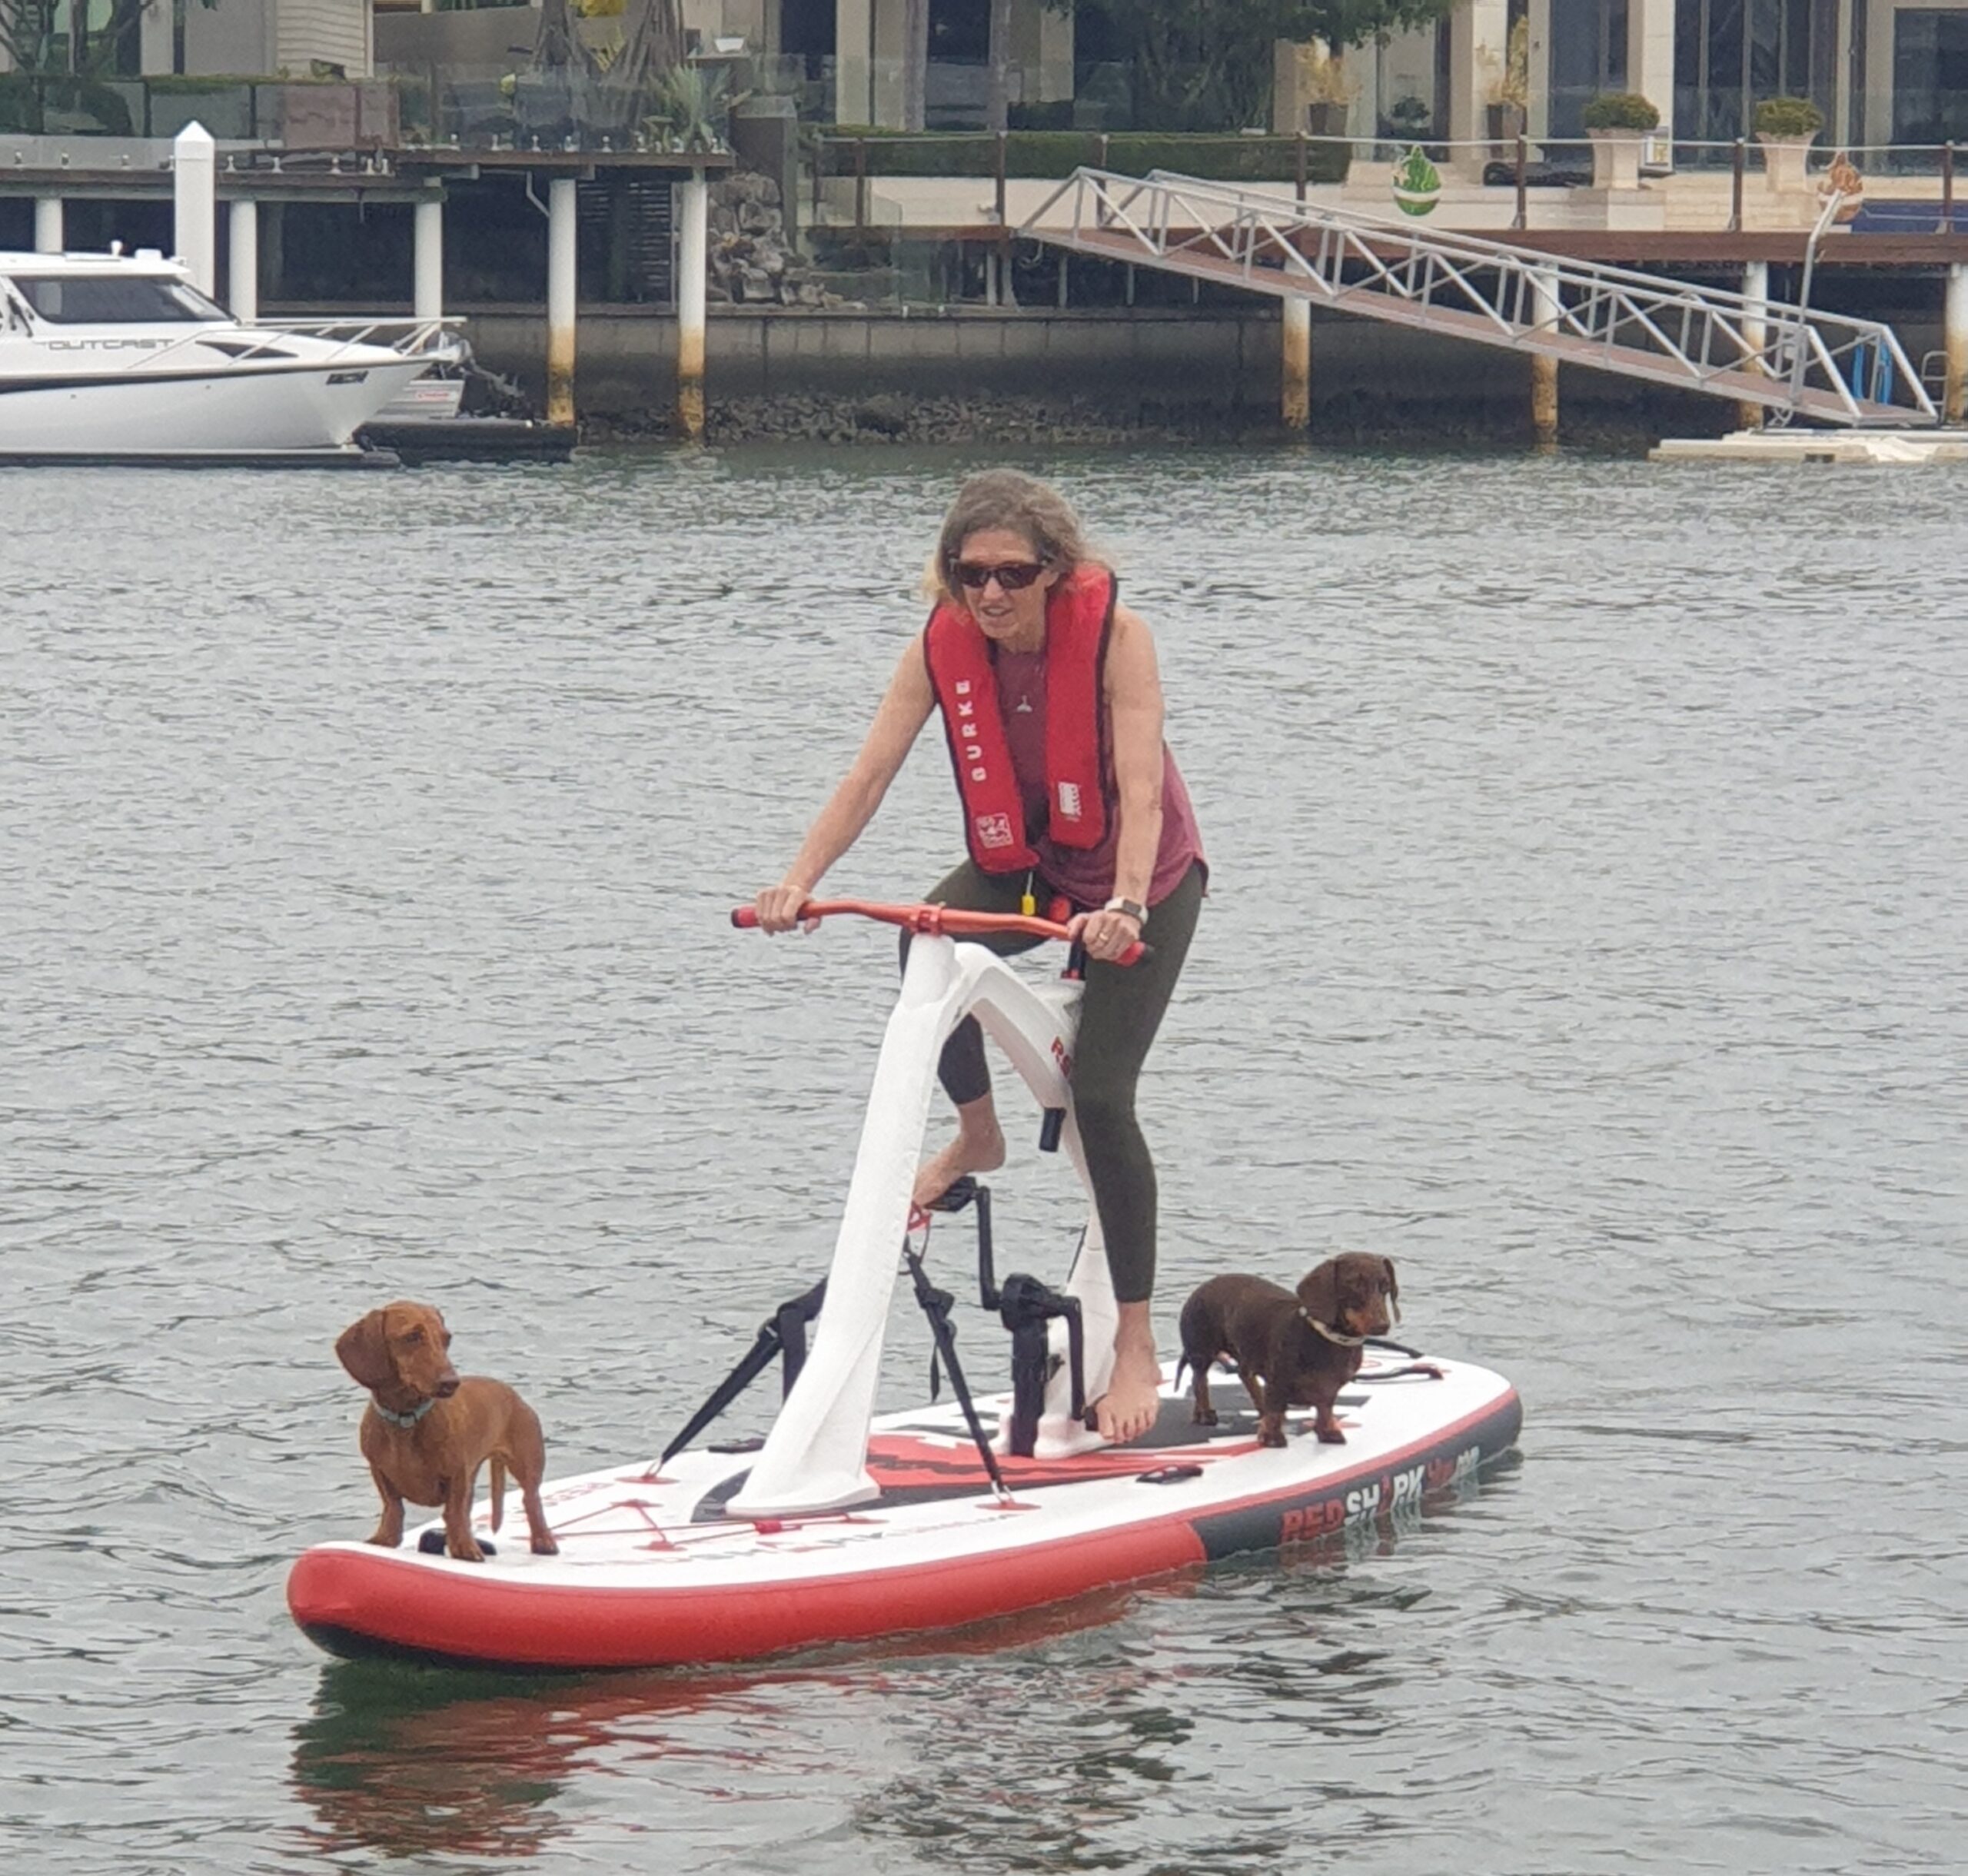 Join Red Shark Bikes Australia for on water demonstrations and trials, Saturday 23 March, 8-11AM at the Helen Penny Gardens, Mooloolaba. This event will provide an opportunity for people to experience the fun of a Red Shark Bike first hand!